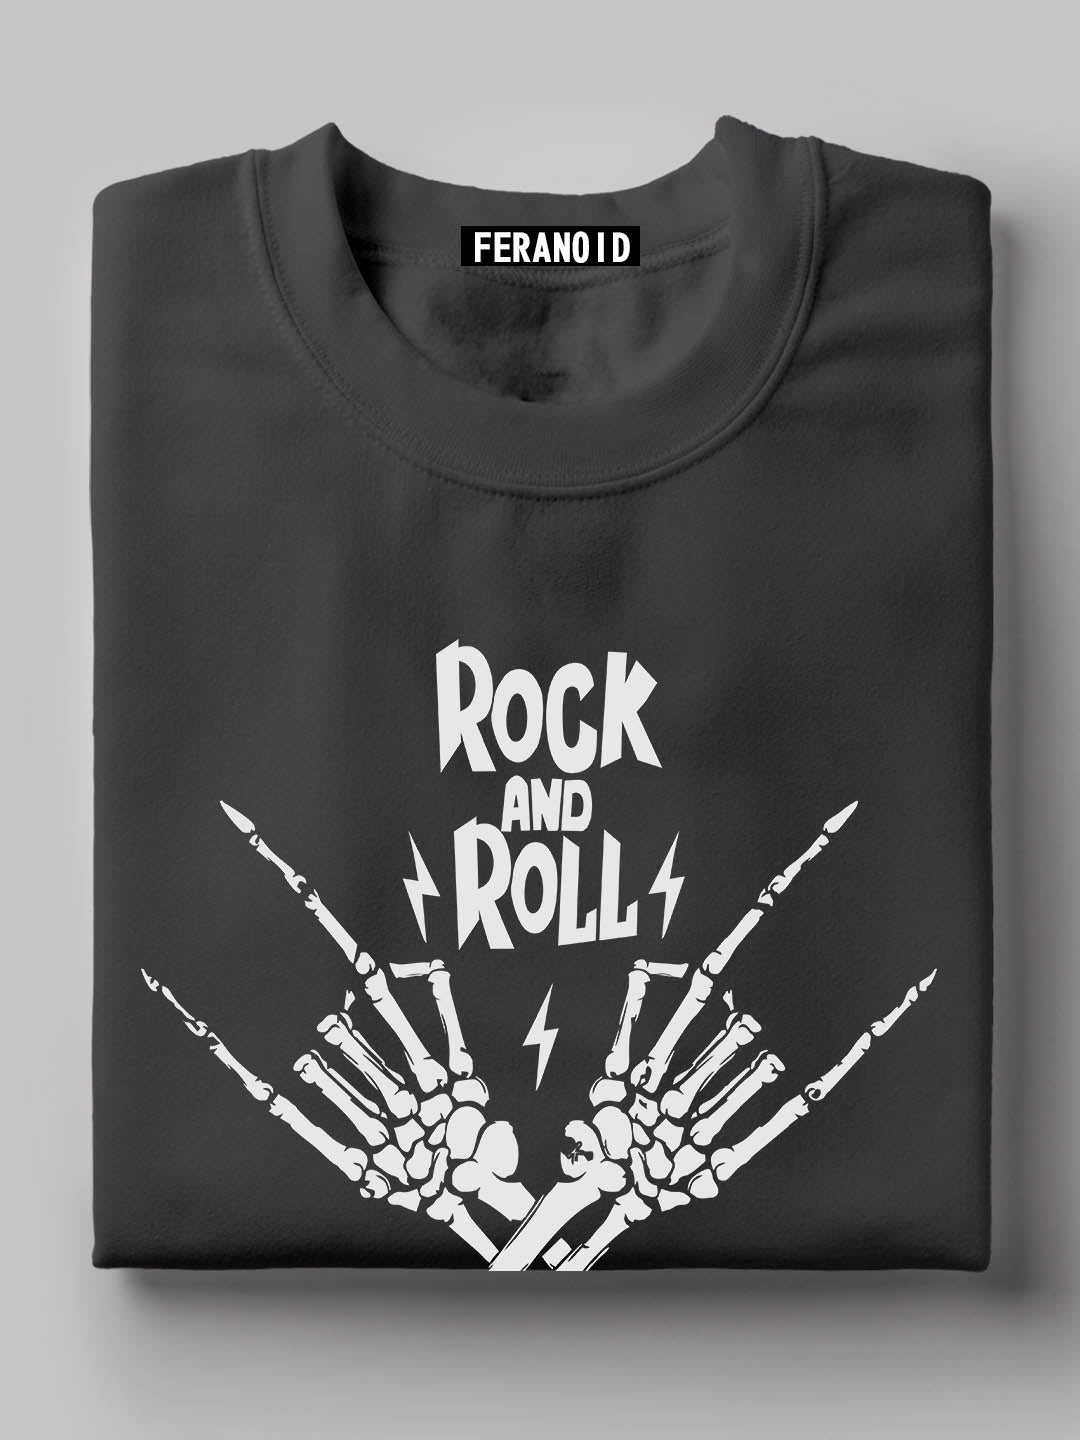 ROCK AND ROLL BLACK T-SHIRT